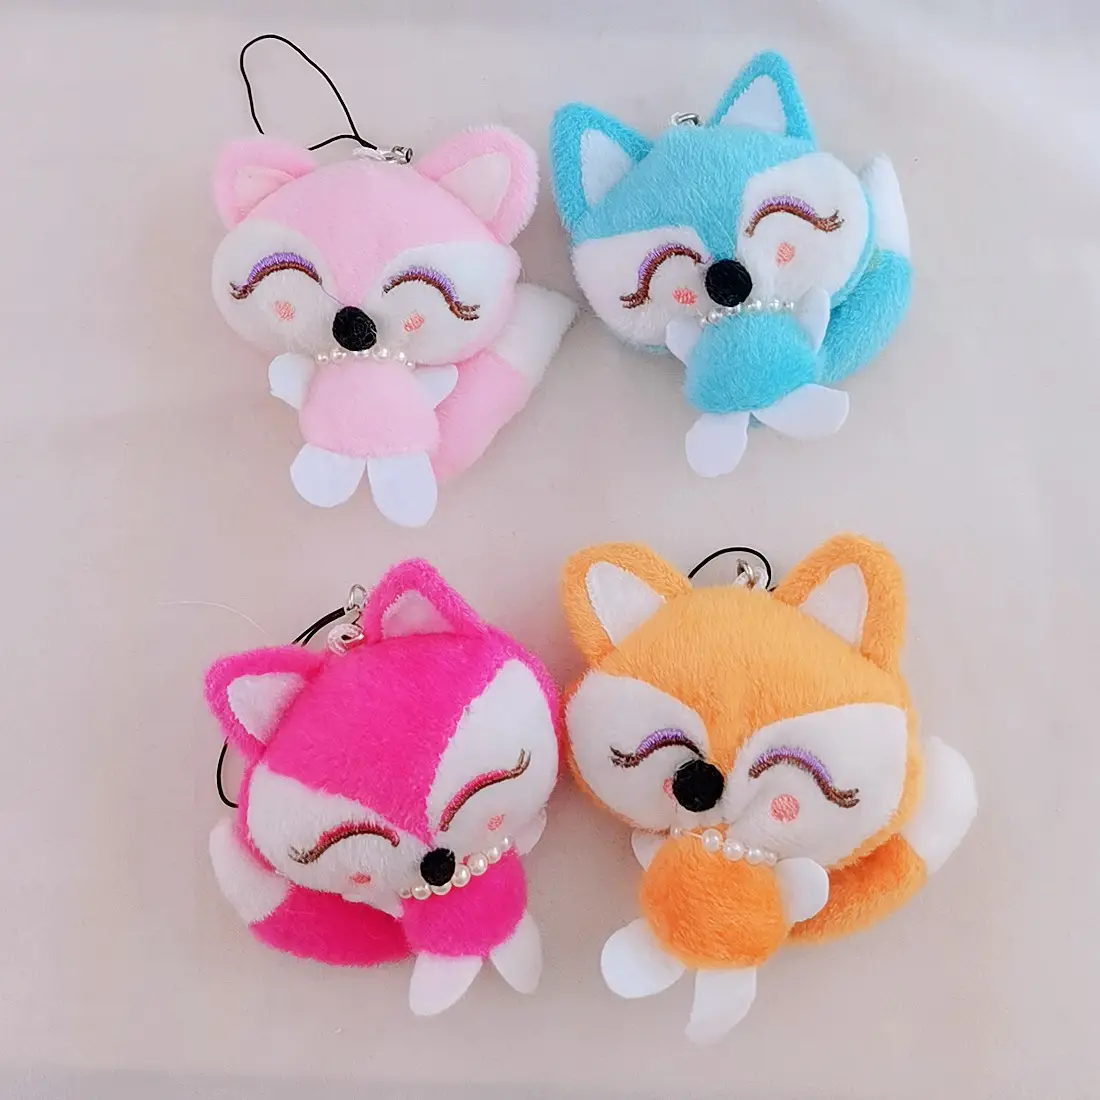 Cartoon Plush Cute Foxes Keychain Gifts Backpacks Charm Bag Totes Pendant Stuffed Toy Animals